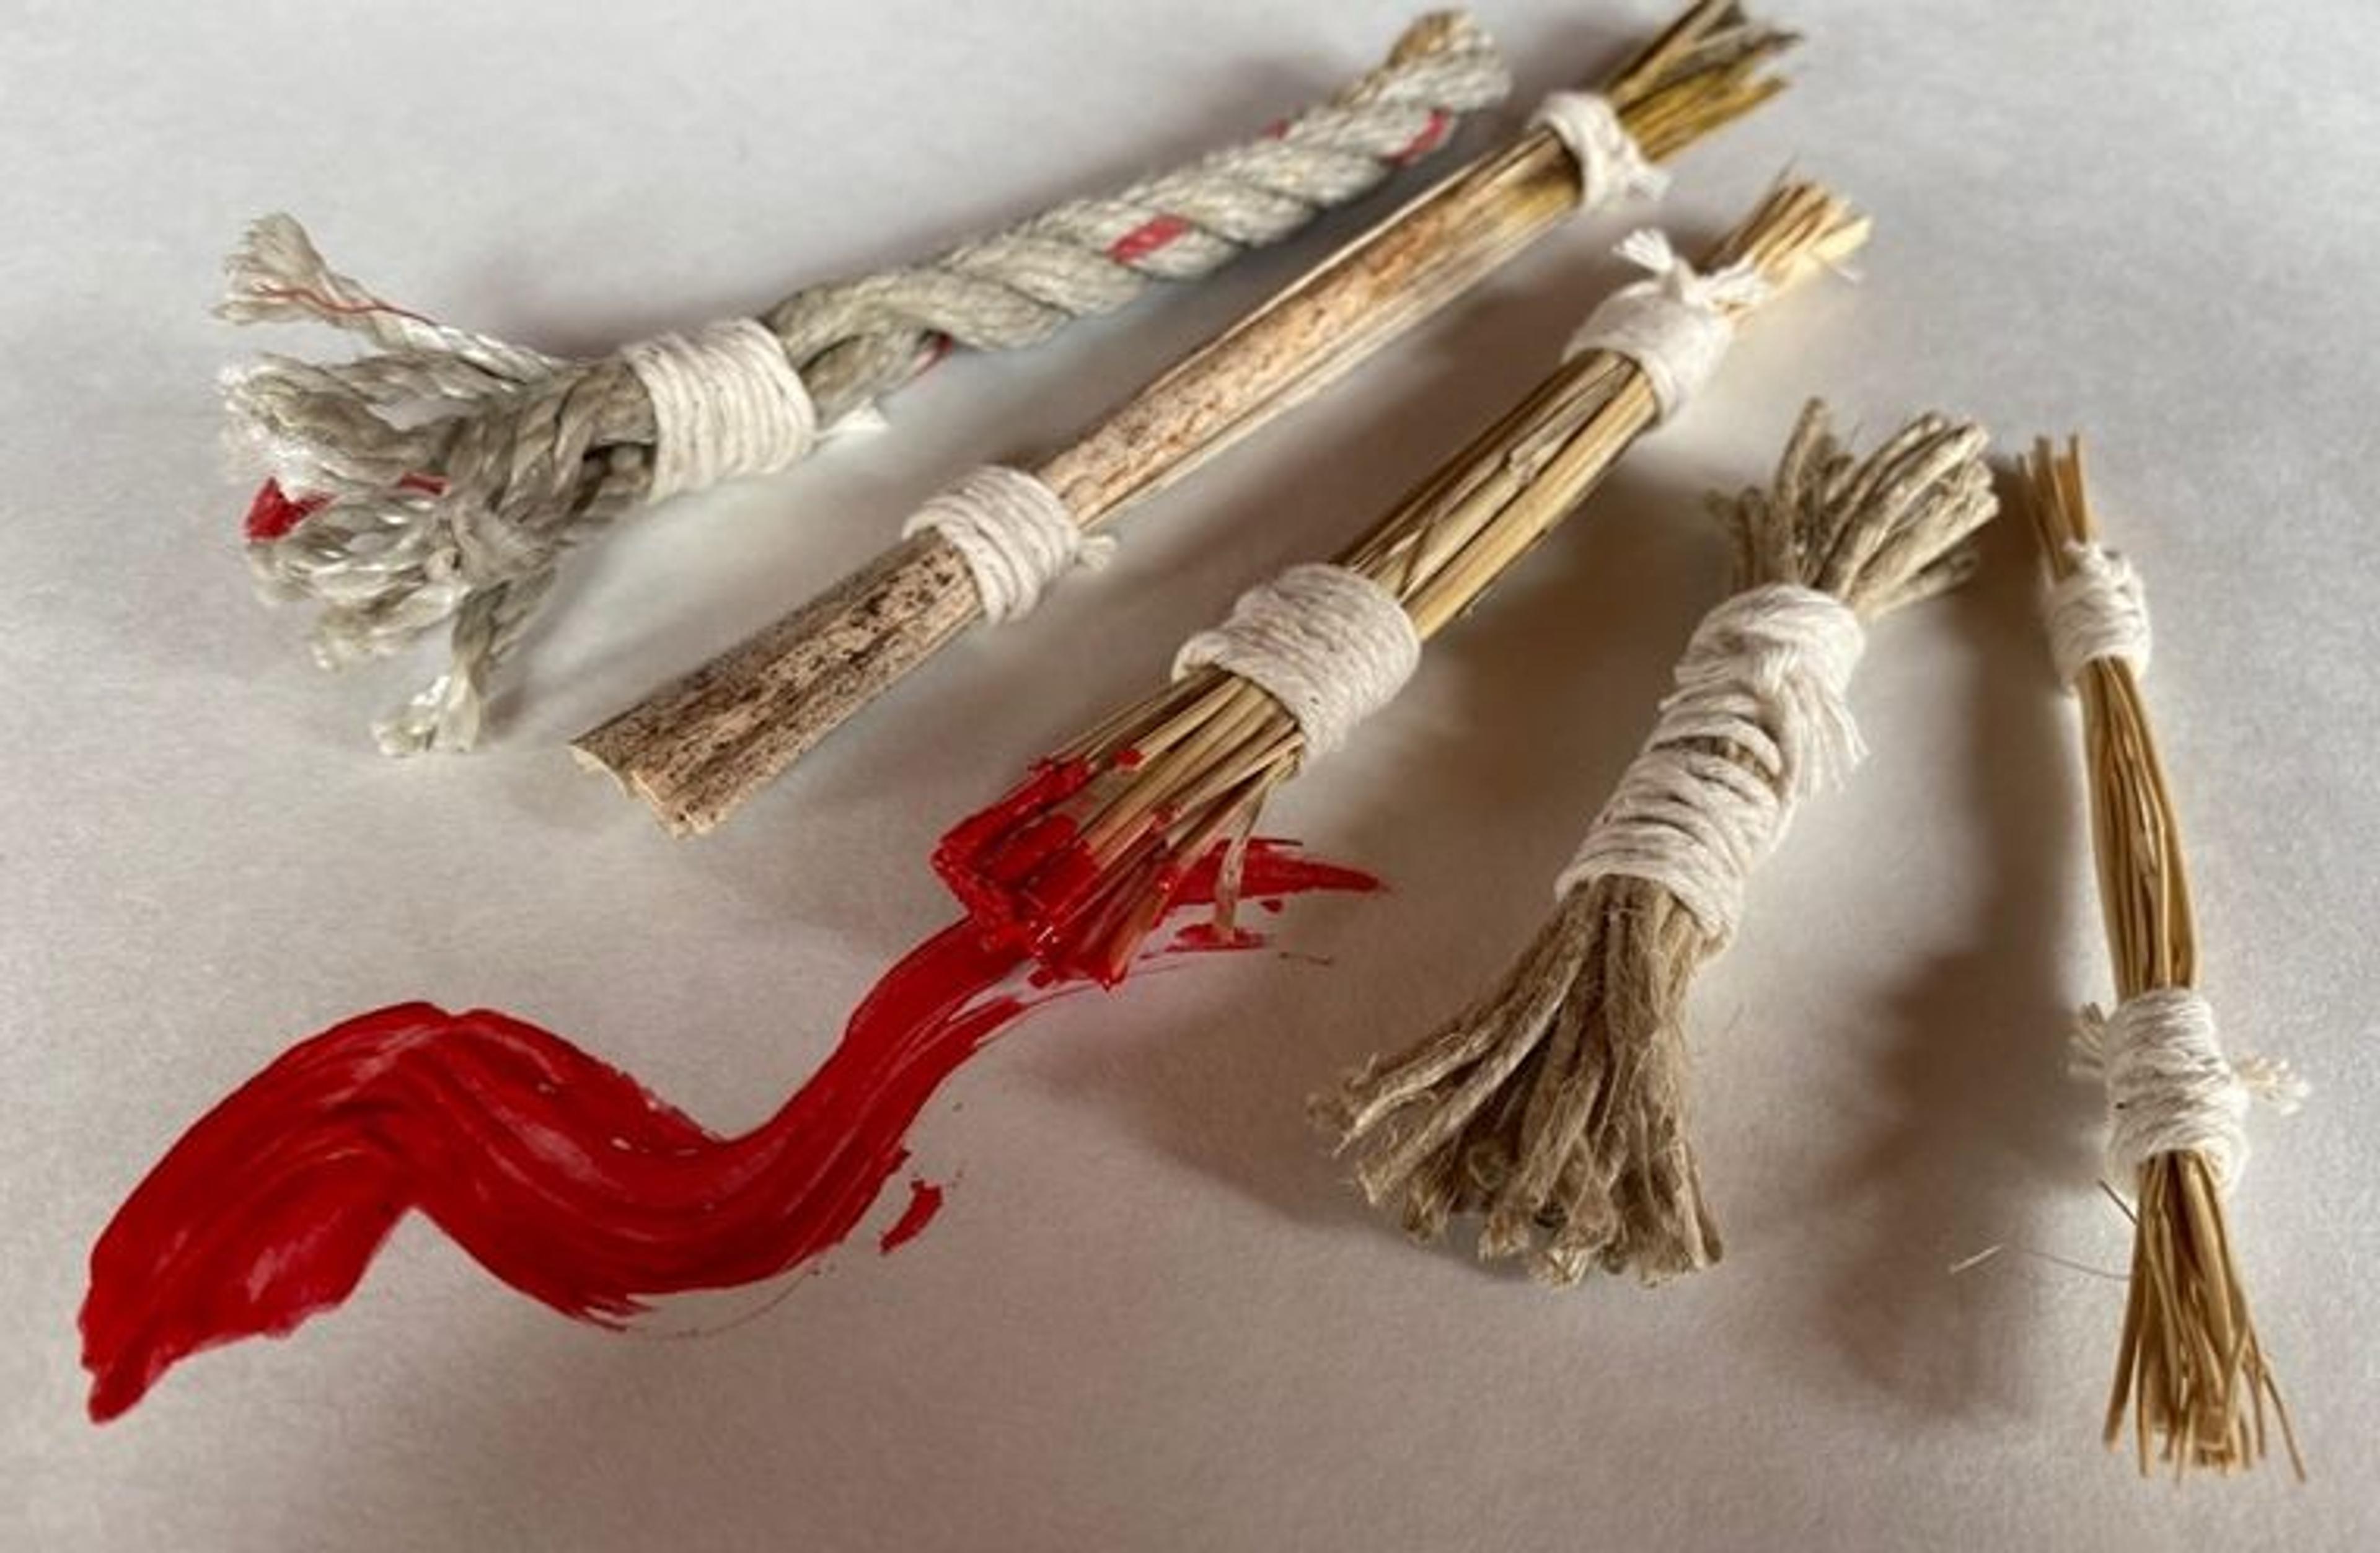 Five handmade paintbrushes built from materials like twigs and cord. One has red paint on the tip, leading to a  zig-zag of red paint